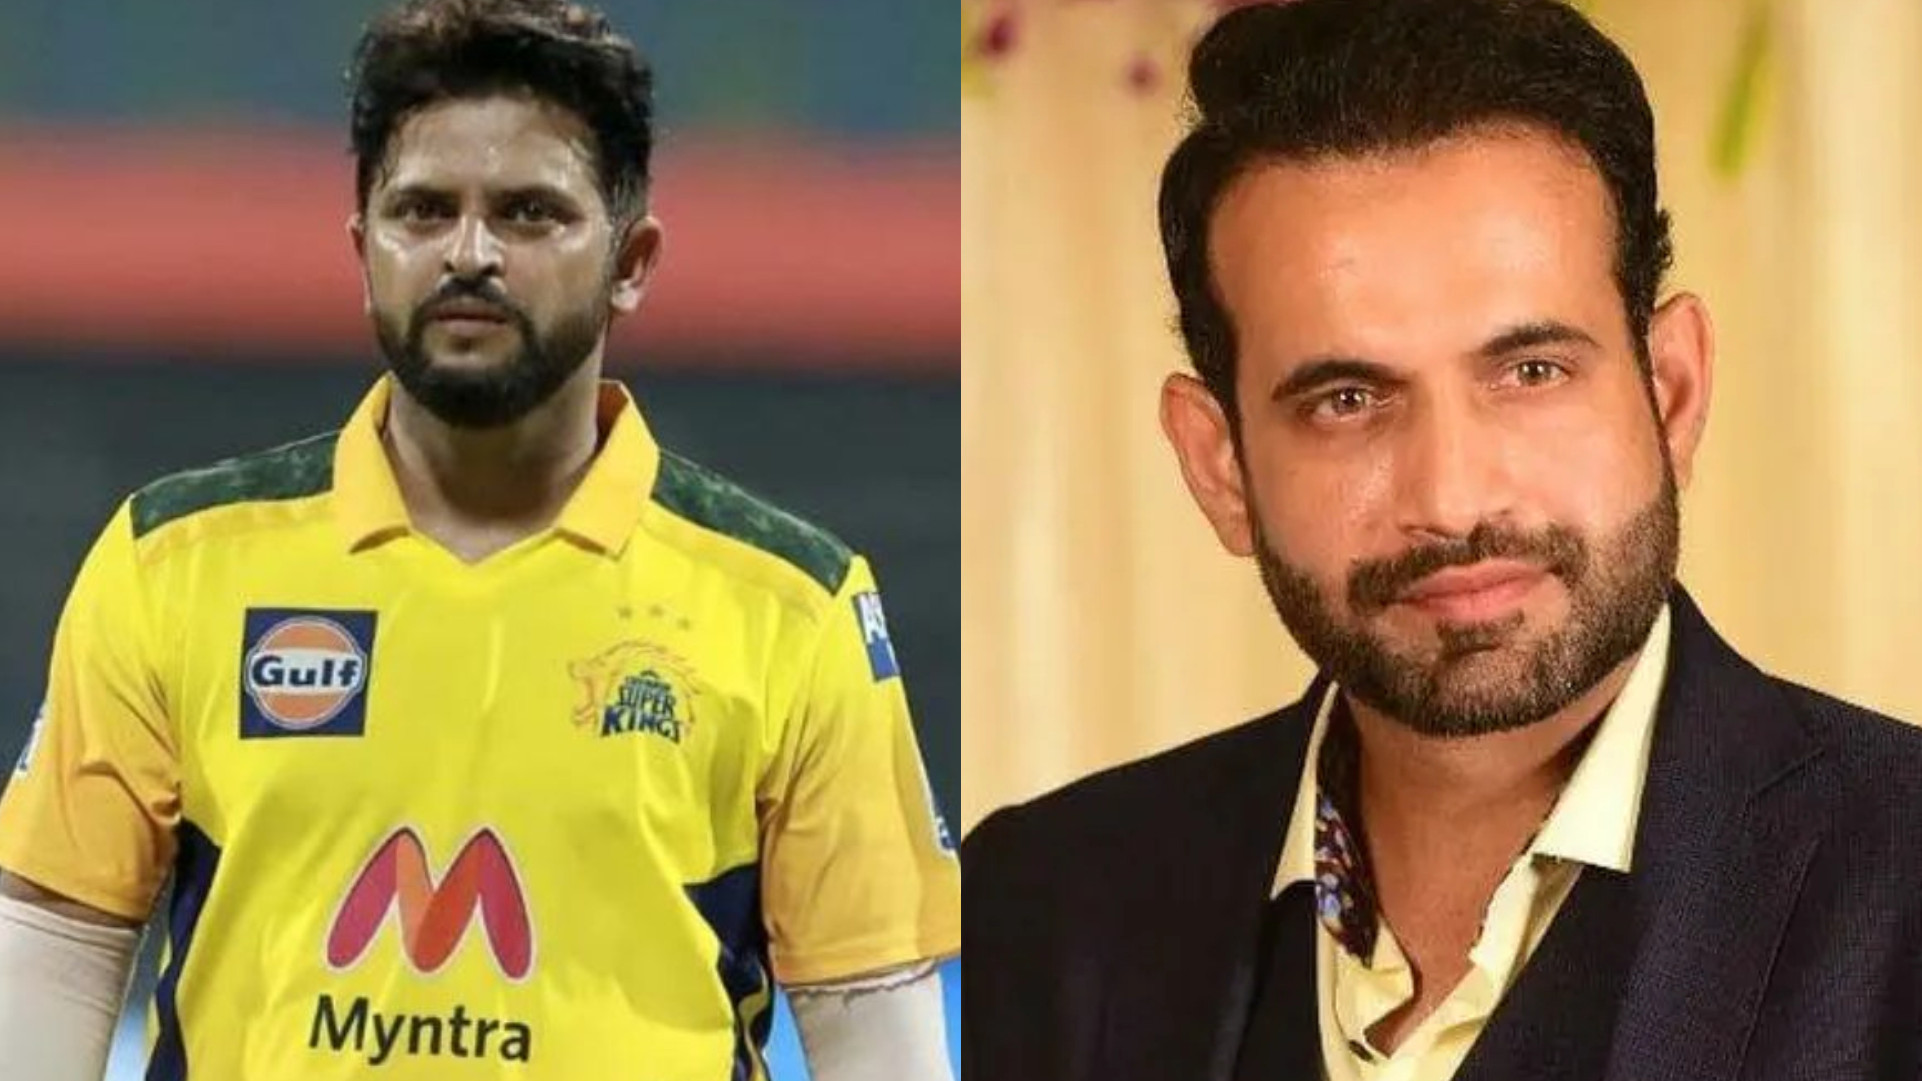 IPL 2022: Irfan Pathan expresses disappointment at Suresh Raina going unsold; says could've been pushed